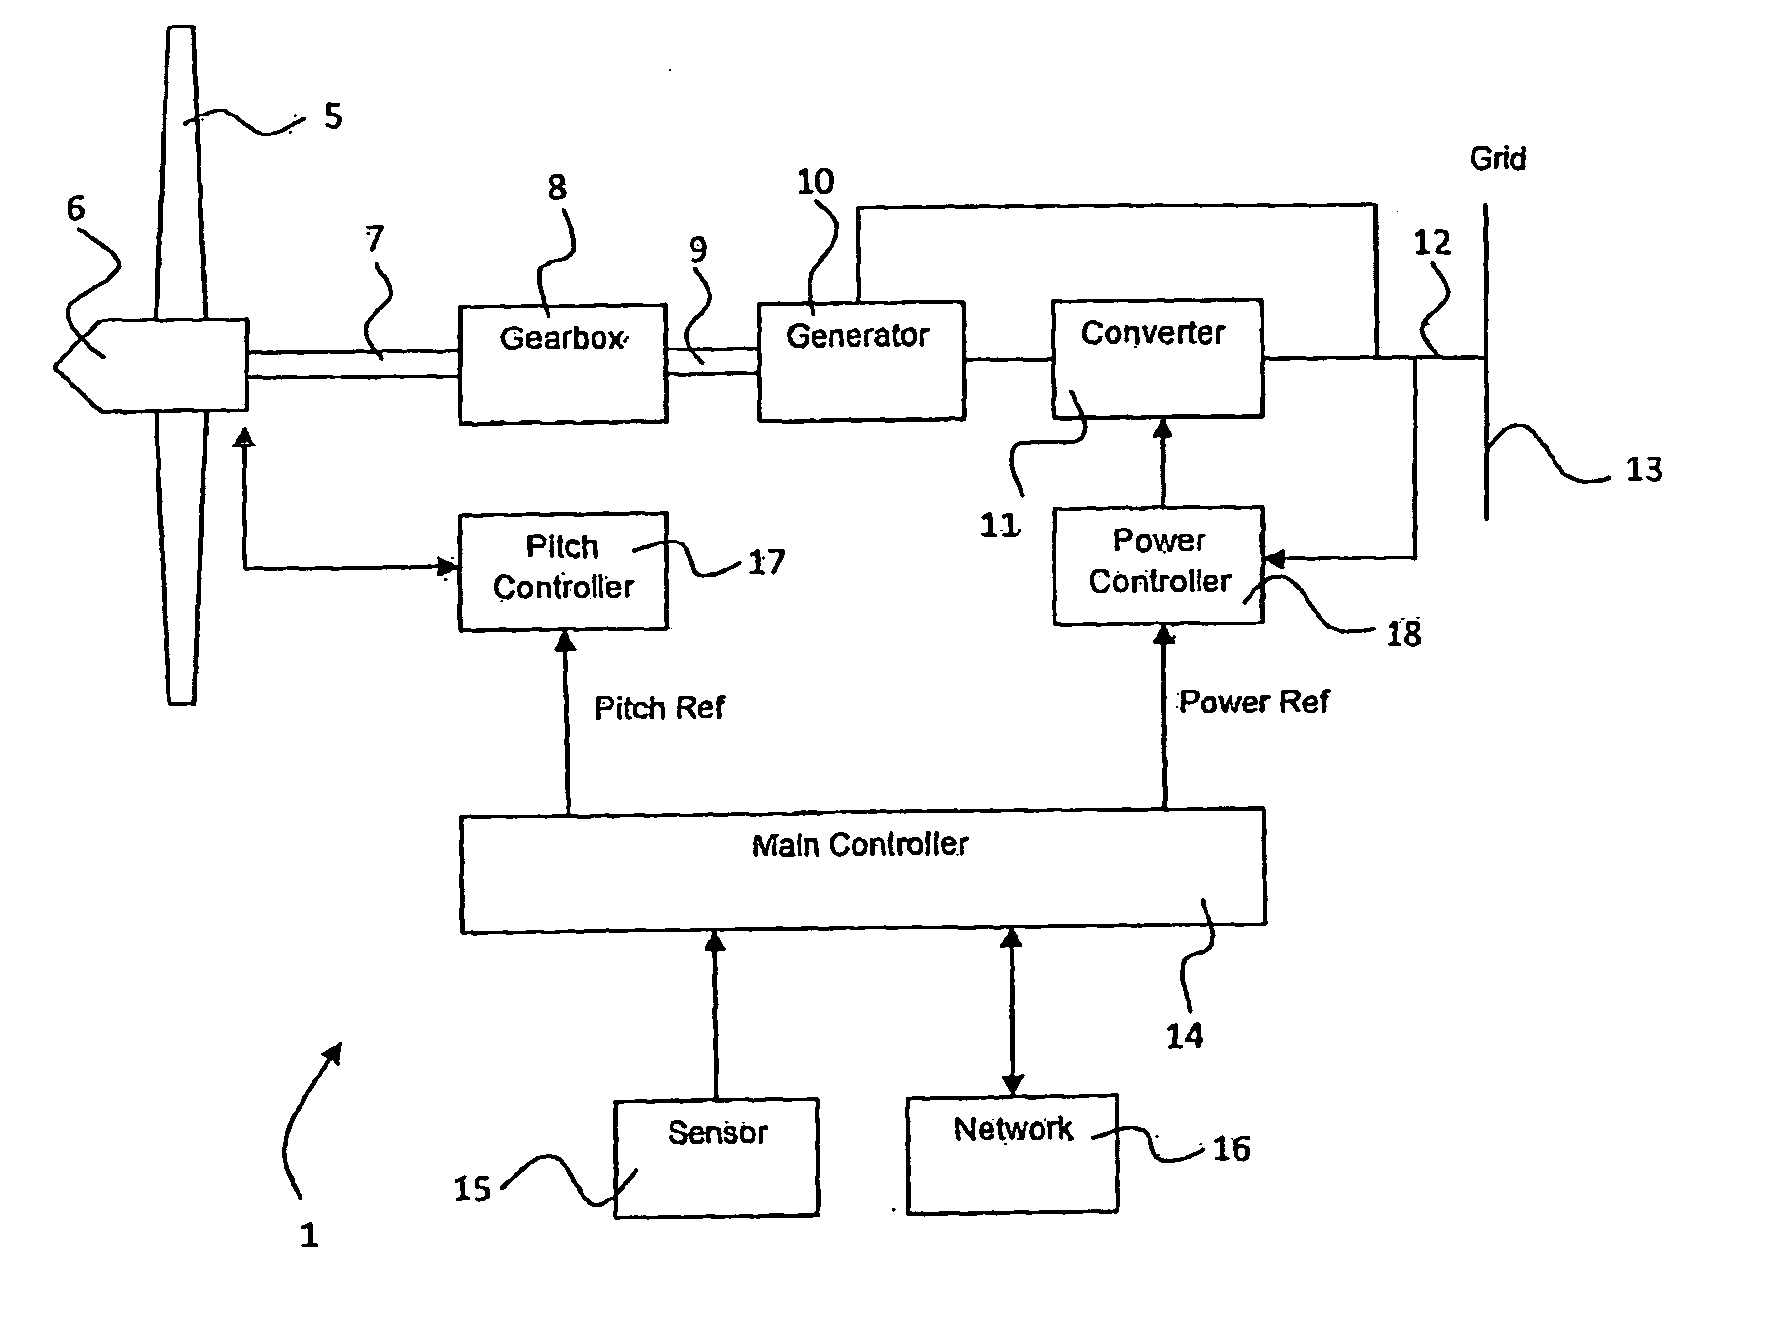 Wind turbine having a control method and controller for performing predictive control of a wind turbine generator